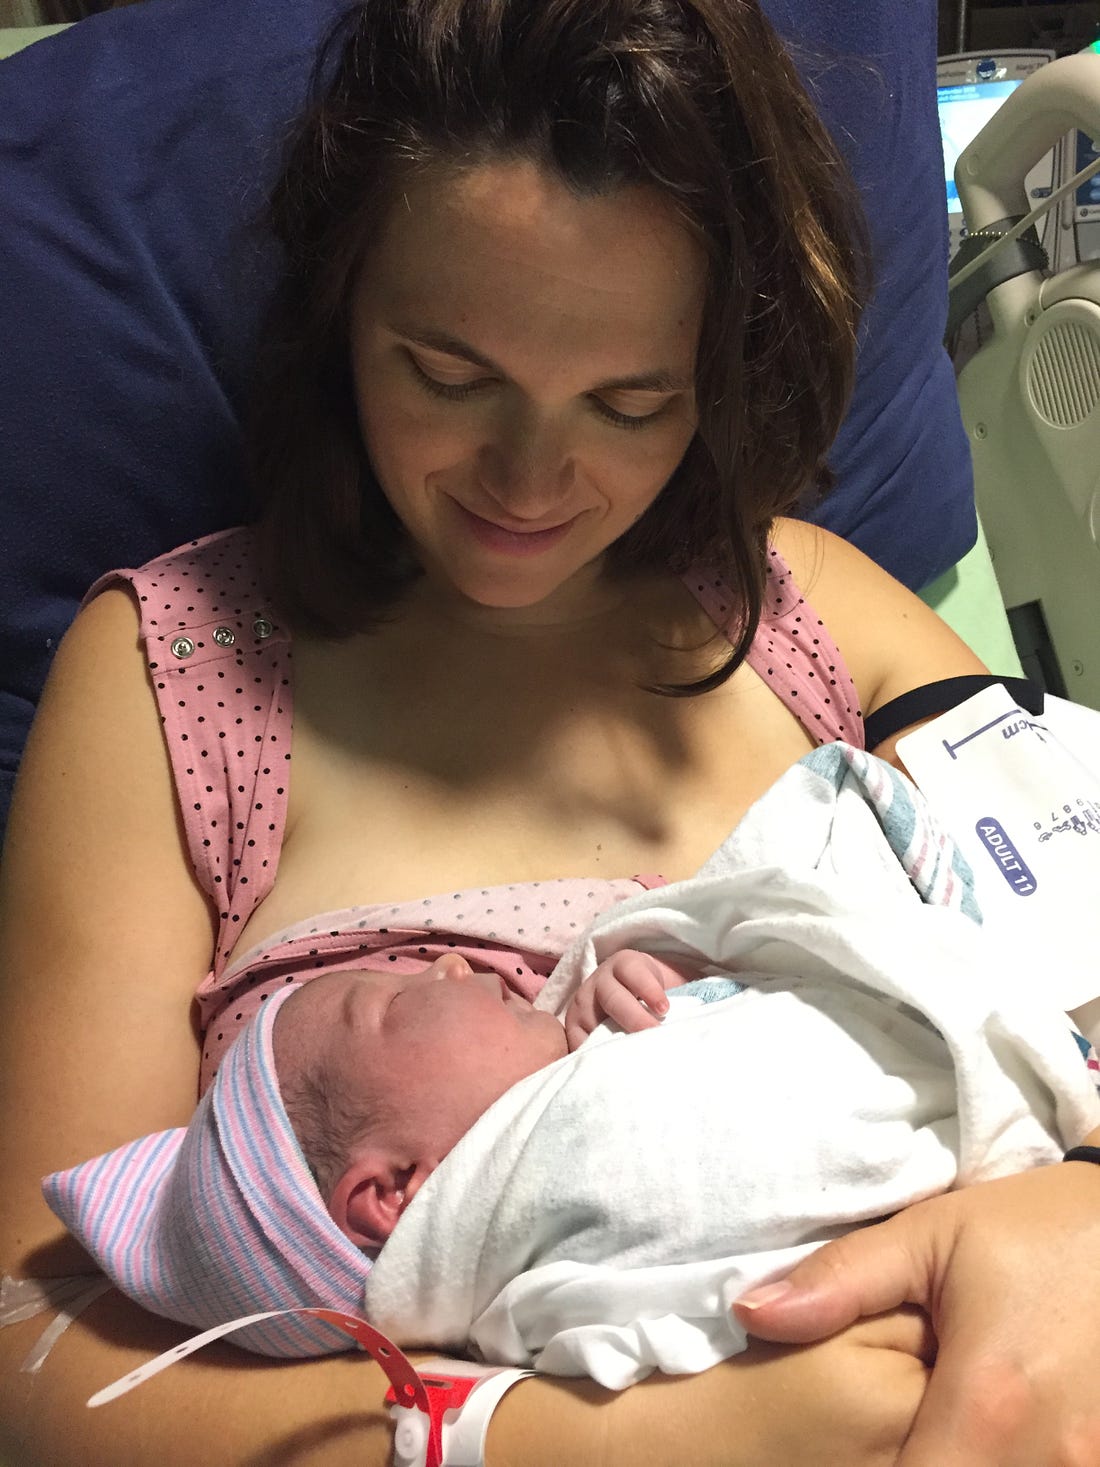 Photo shows a woman with brown hair in a hospital bed staring at a newborn.